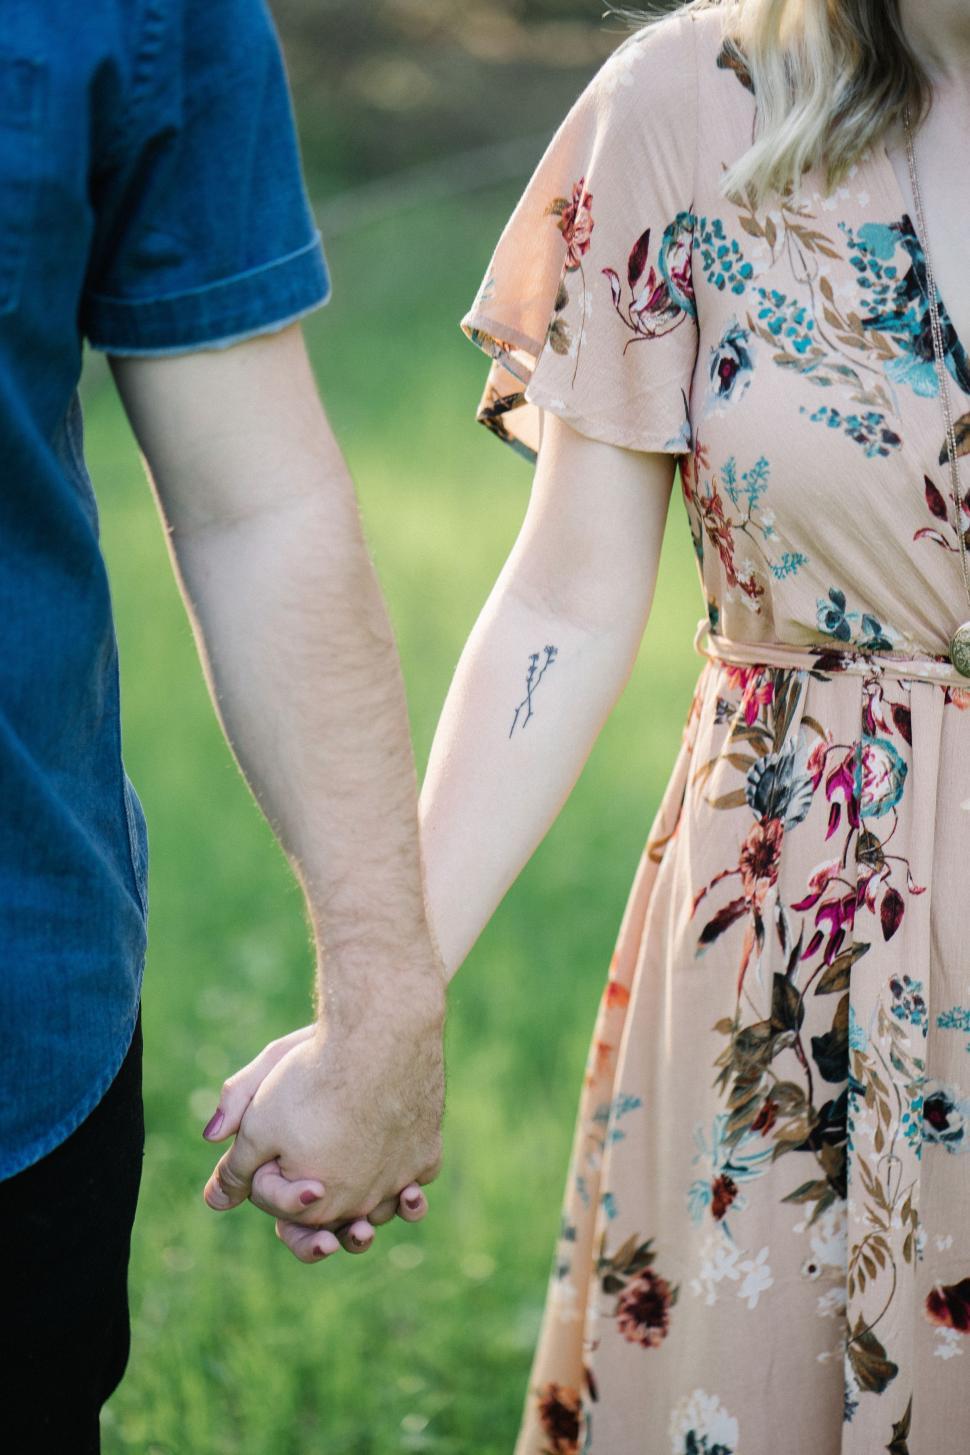 Free Image of Man and Woman Holding Hands in a Field 